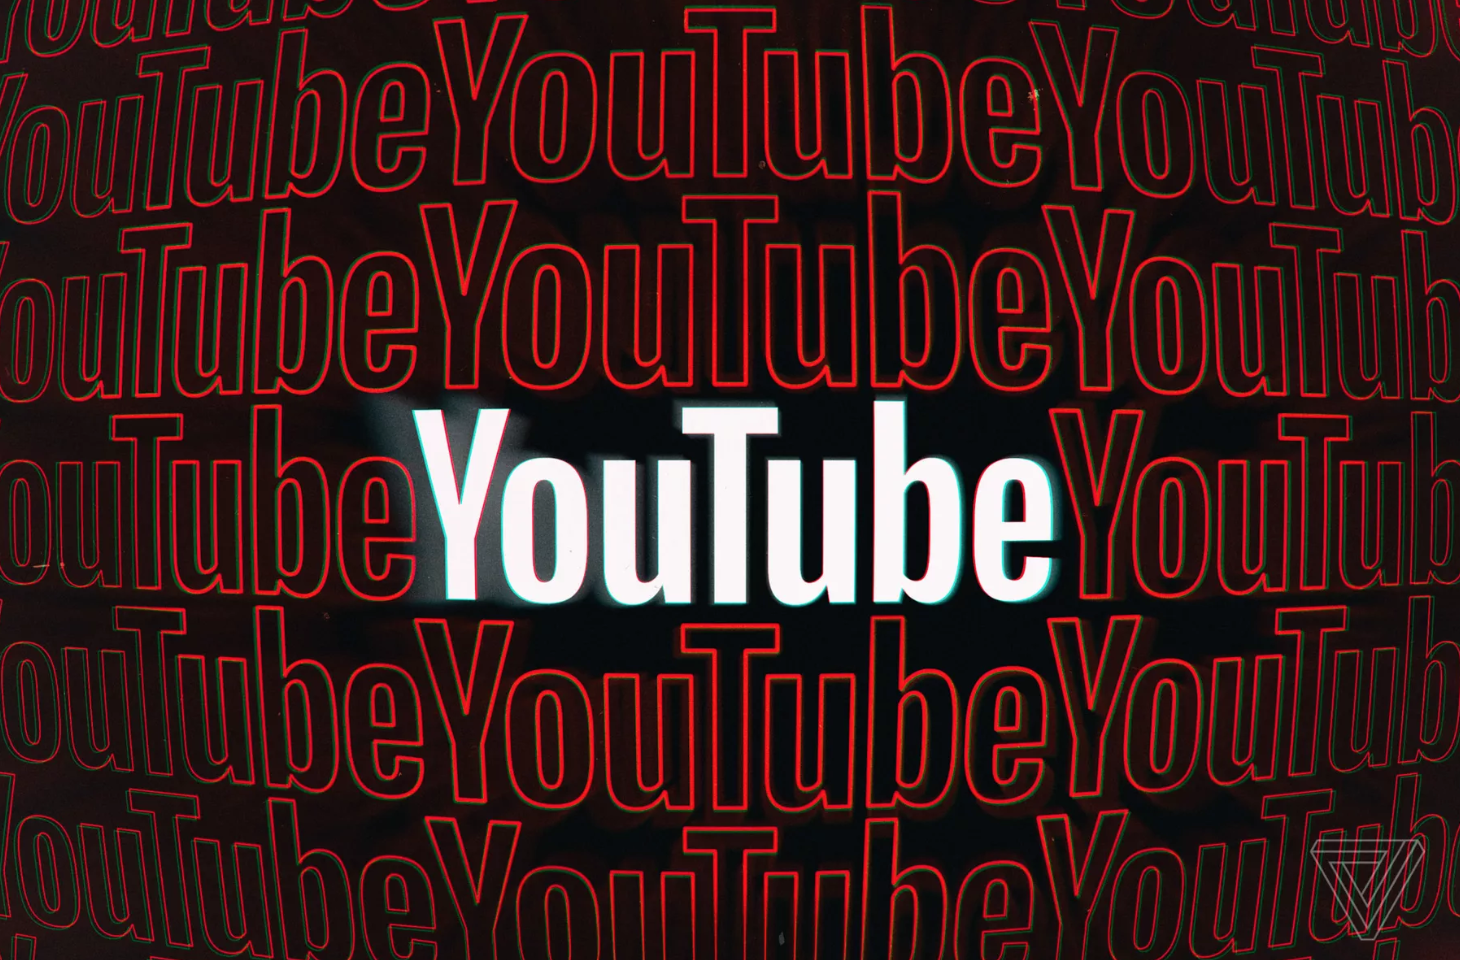 The youtube logo, repeated several times